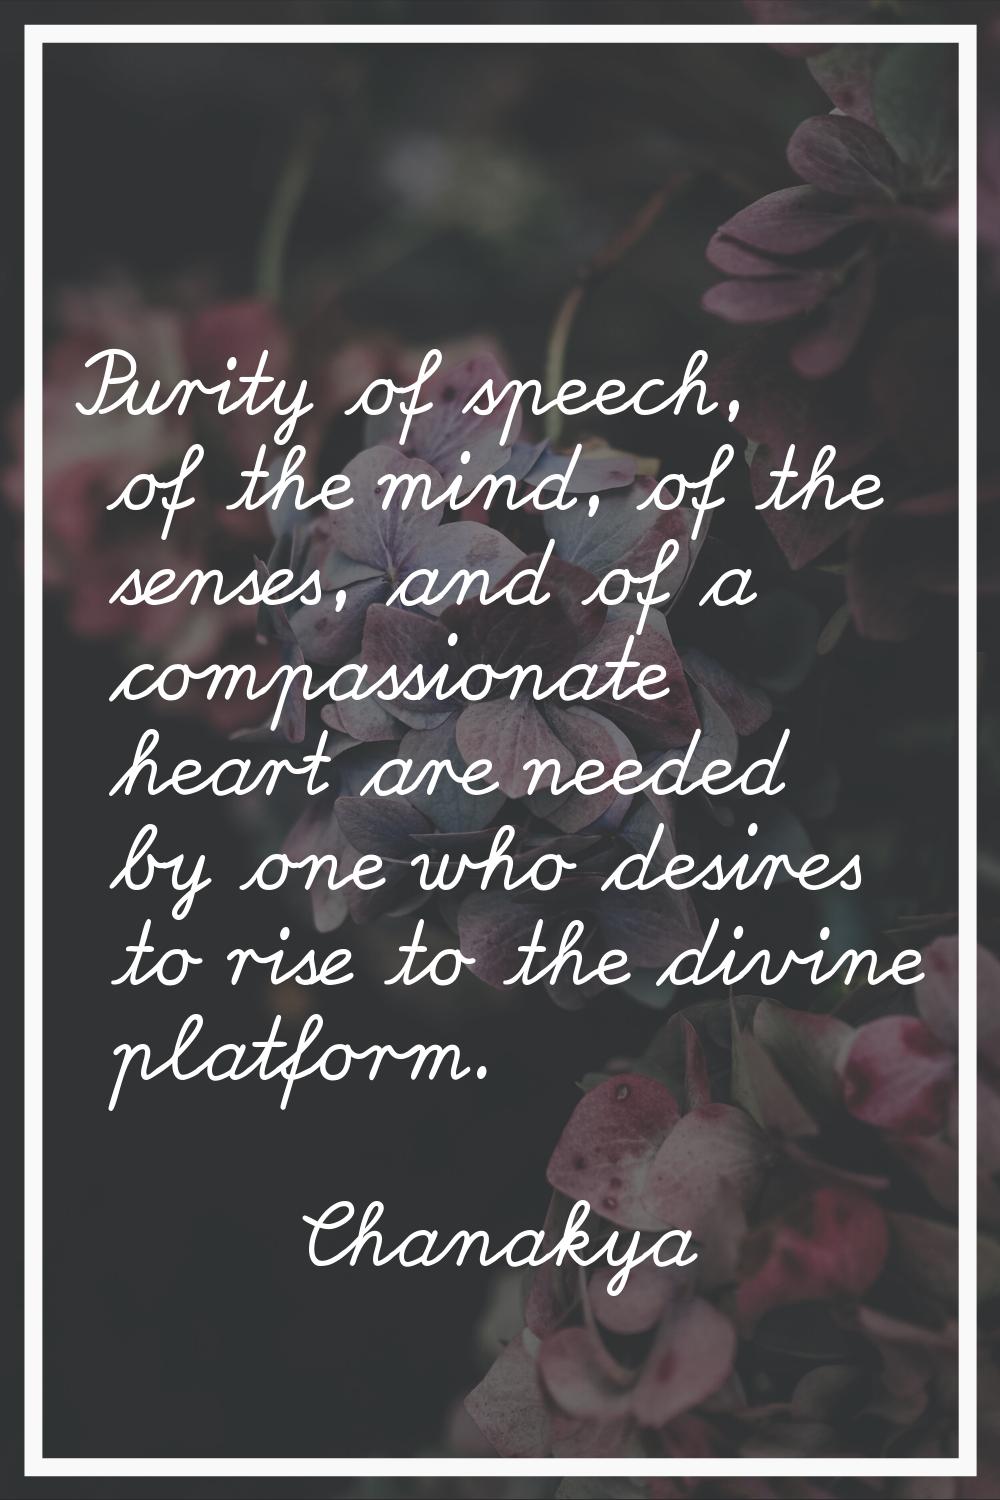 Purity of speech, of the mind, of the senses, and of a compassionate heart are needed by one who de